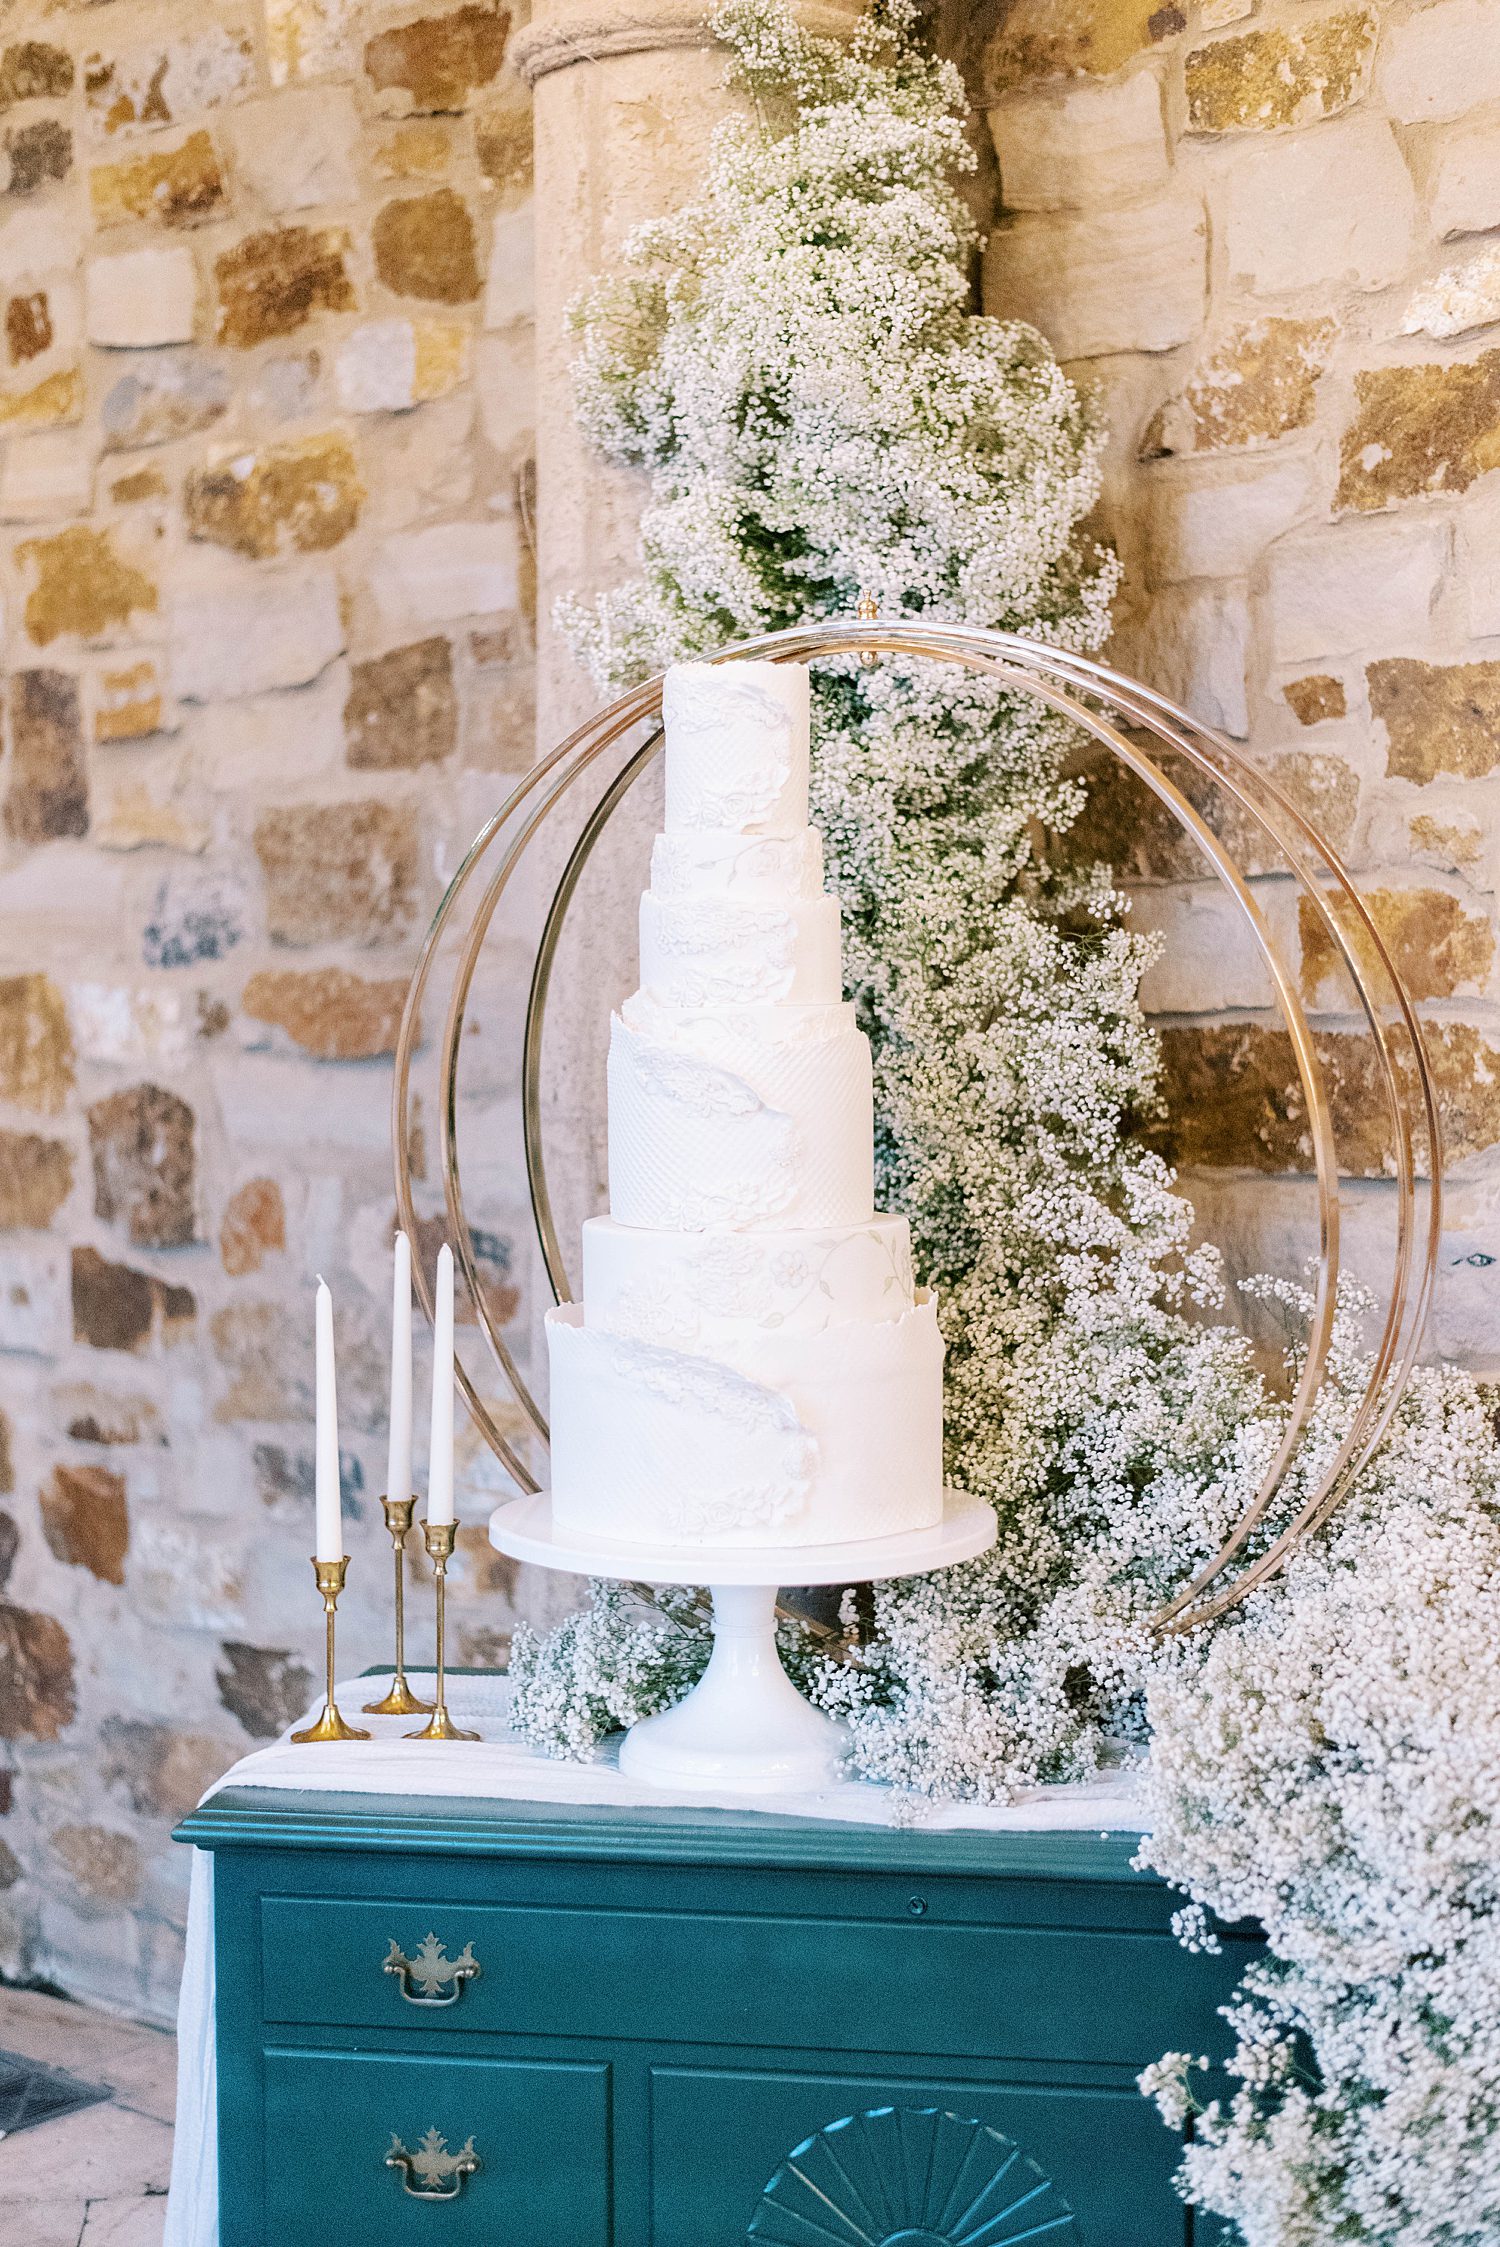 tall white wedding cake with tiers sits on emerald chest